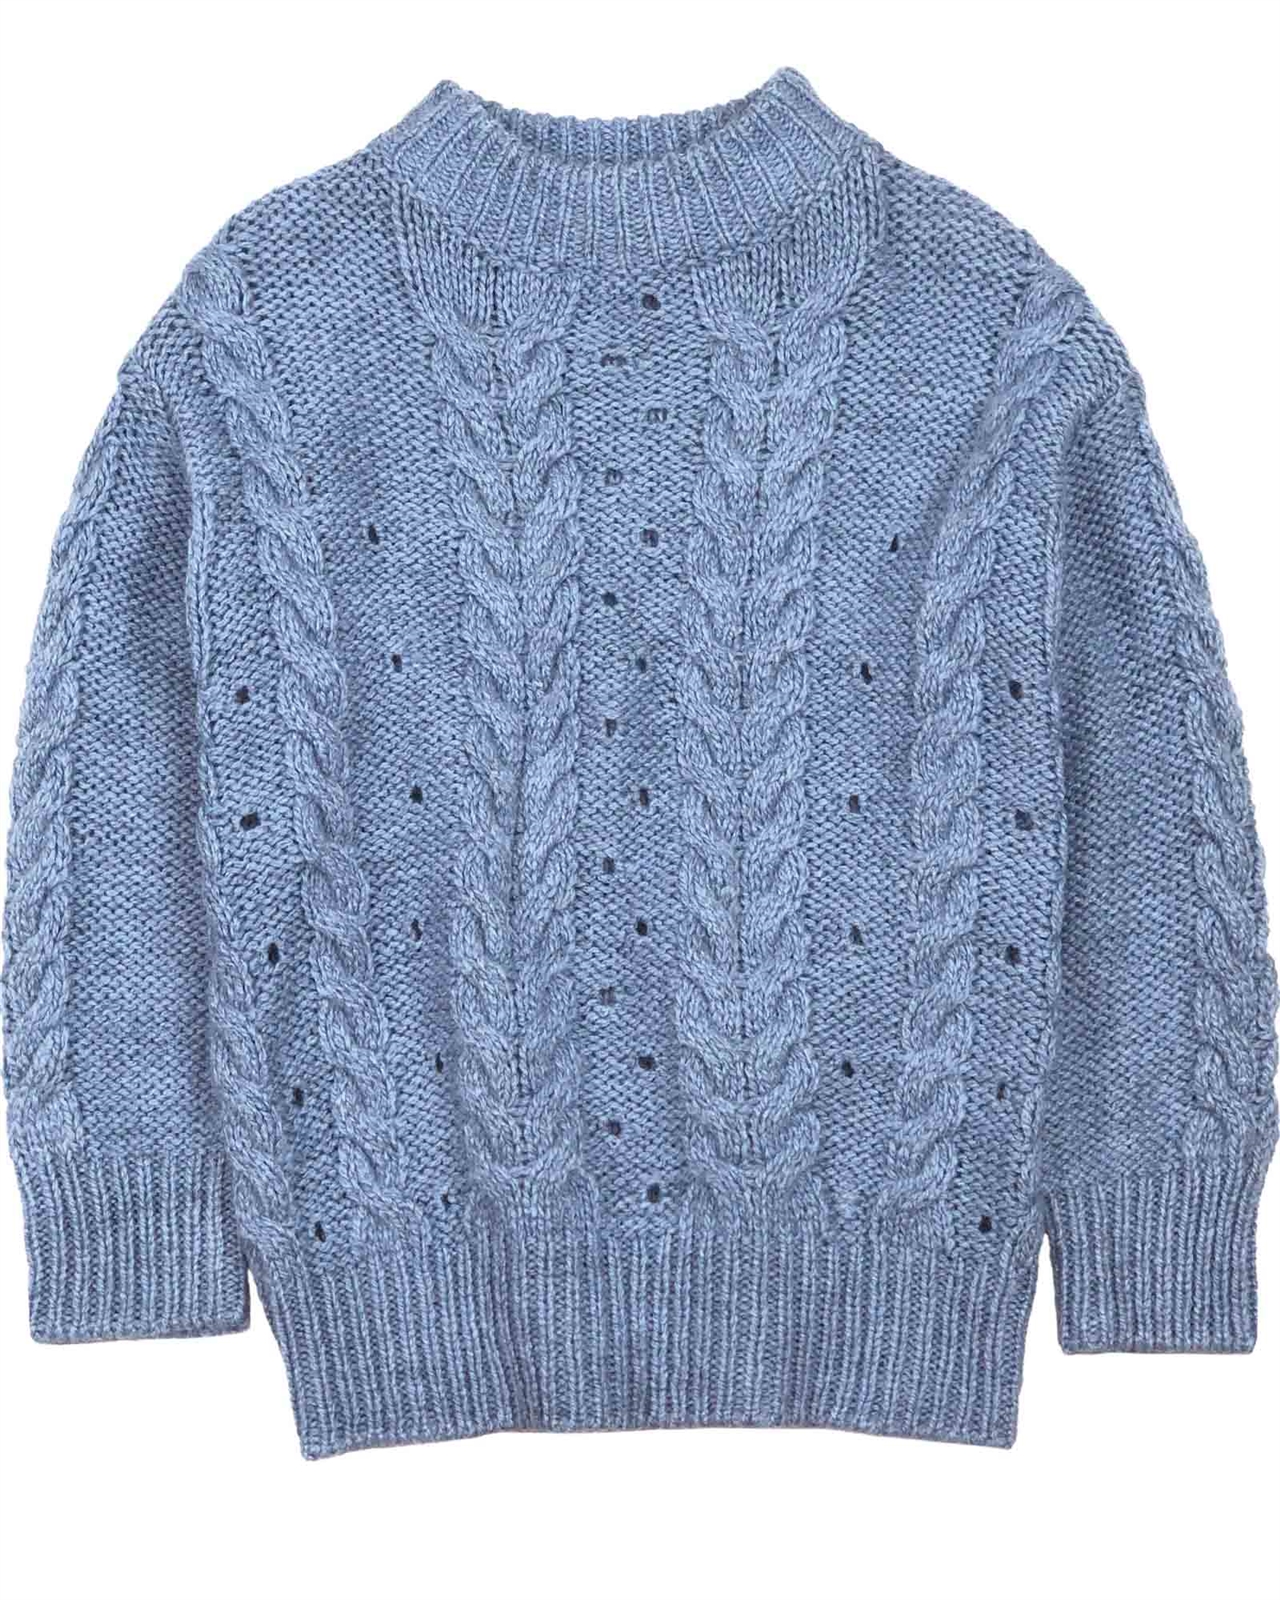 Mayoral Junior Girl's Cable Knit Sweater in Blue - Mayoral - Mayoral ...